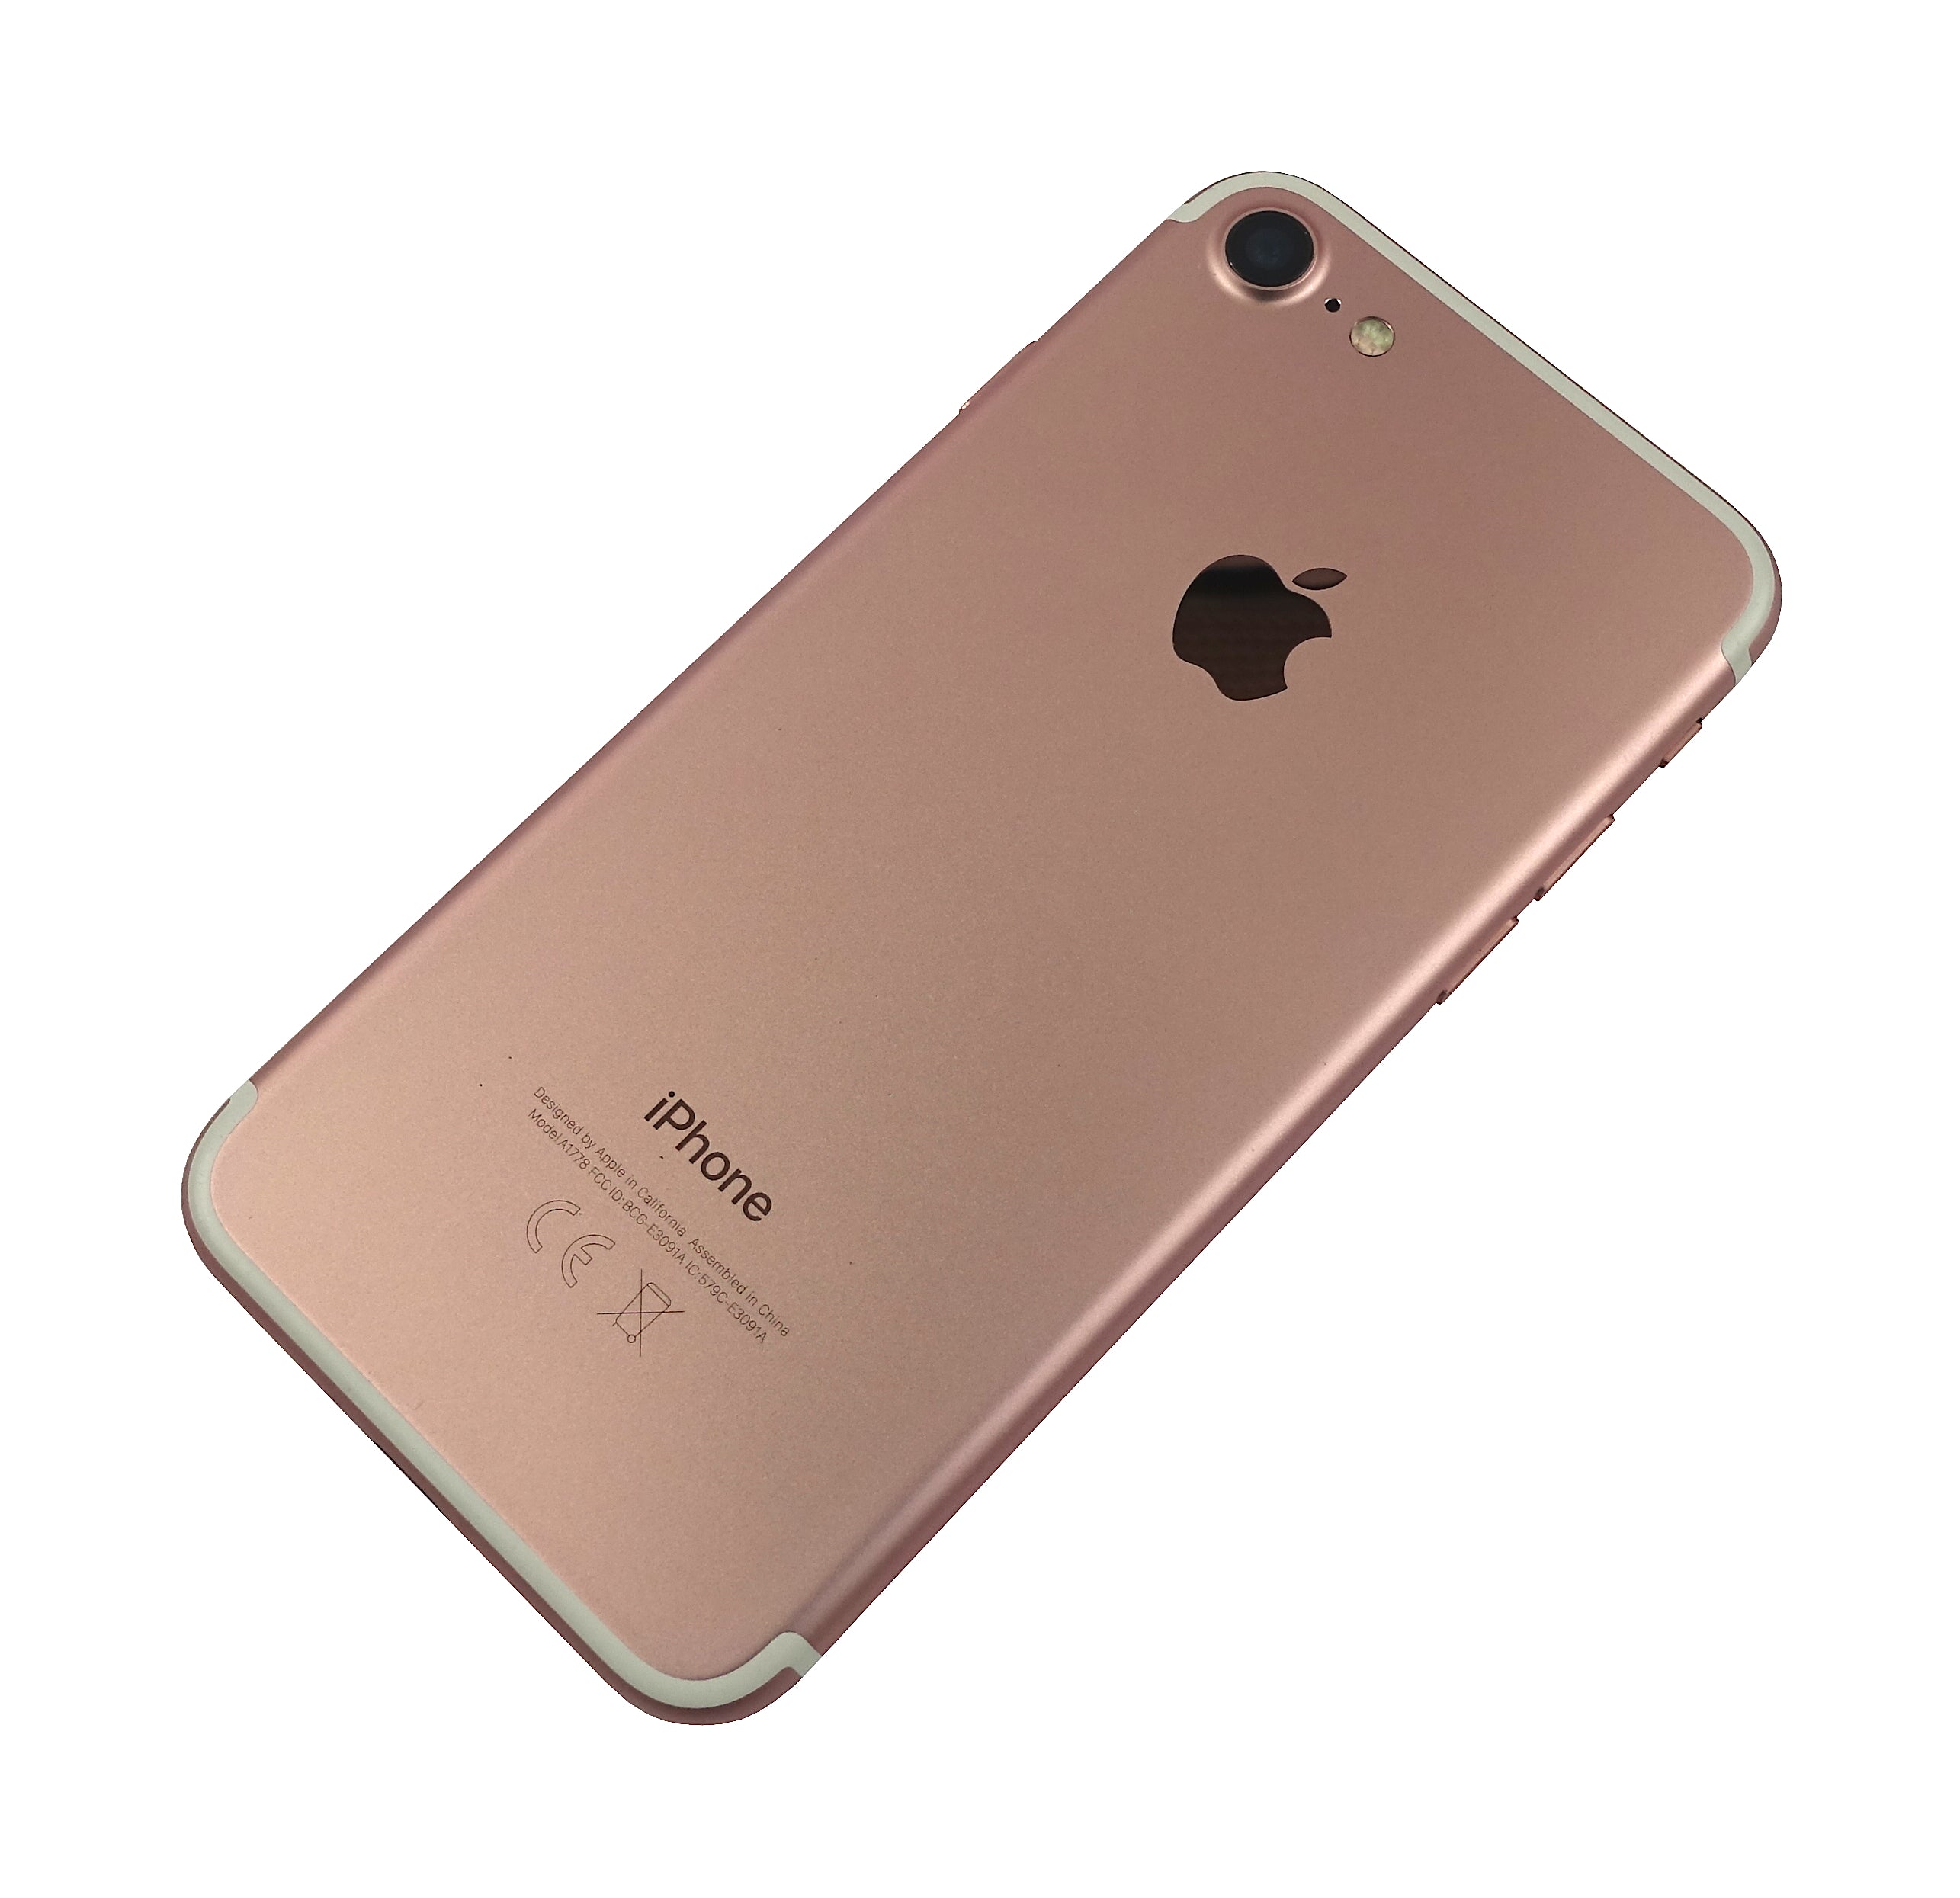 Apple iPhone 7 Smartphone, 32GB, Network Unlocked, A1778, Rose Gold